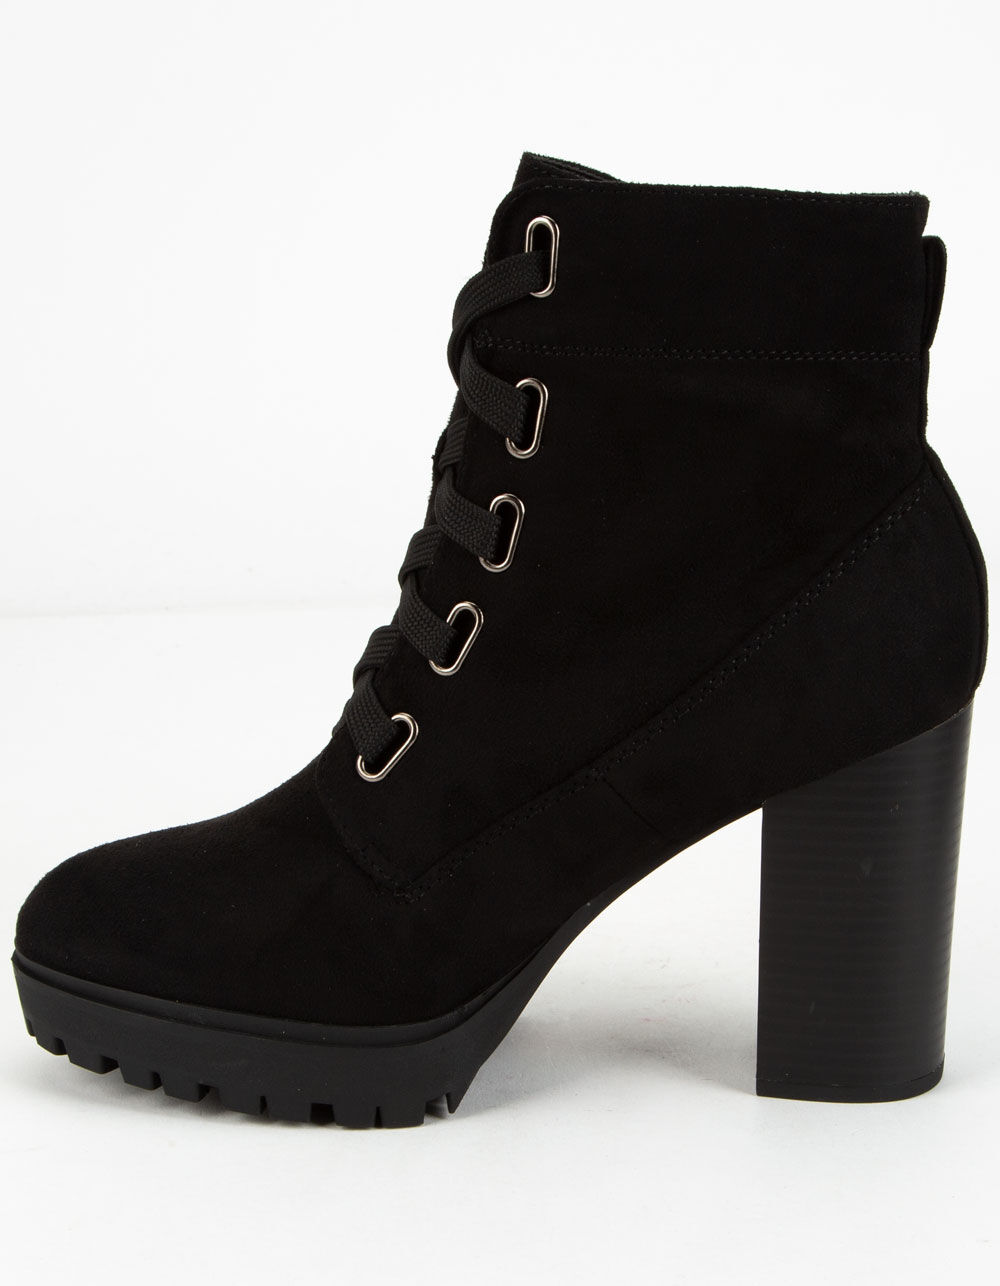 SODA Lug Sole Lace Up Eyelet Black Womens Booties - BLACK | Tillys